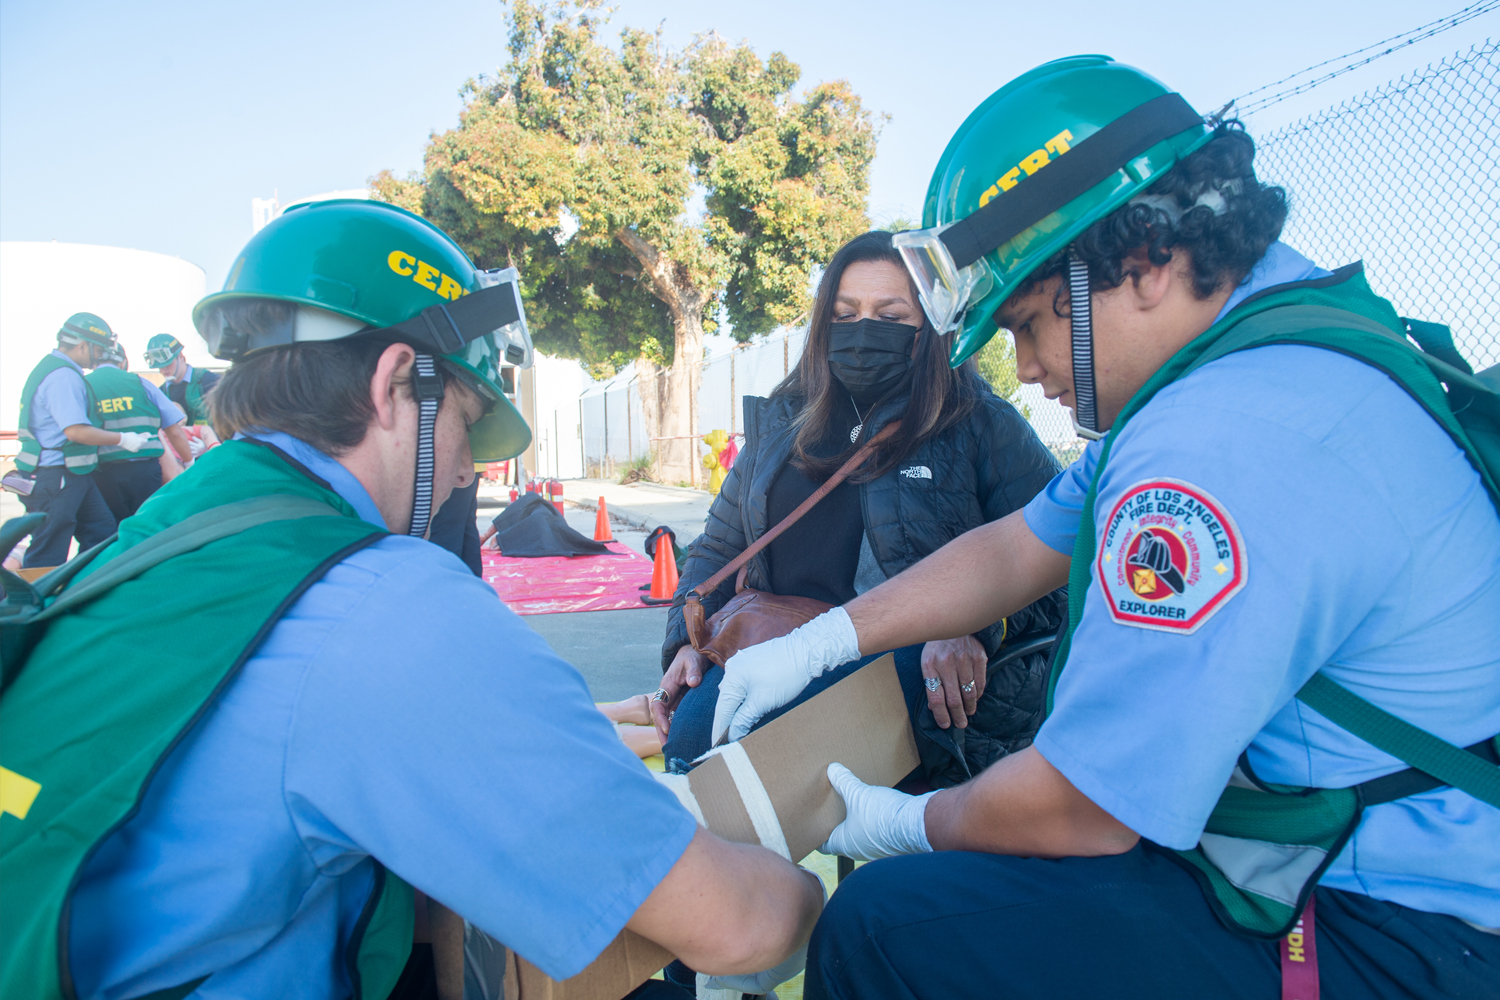 More than 50 Los Angeles County Fire Department (LACoFD) Fire Explorers completed the 20-hour Community Emergency Response Team (CERT) training and earned a certificate of completion on Saturday, January 28, 2023.